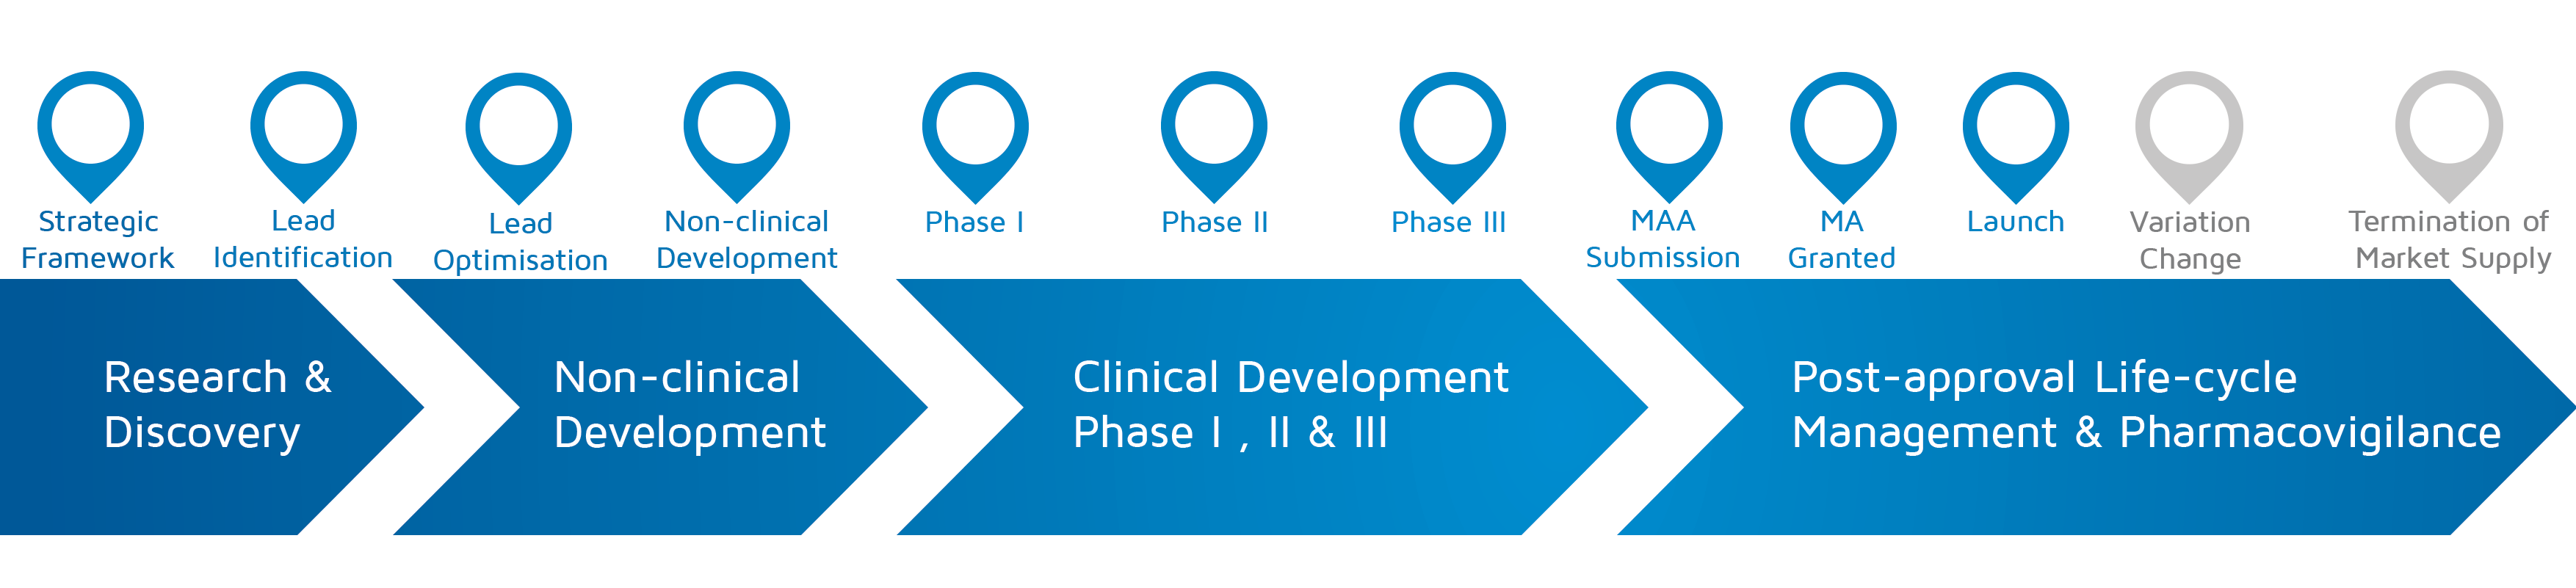 A visual representation of in which phase of medicines research and development process an activity takes place with strategic framework to Launch highlighted.